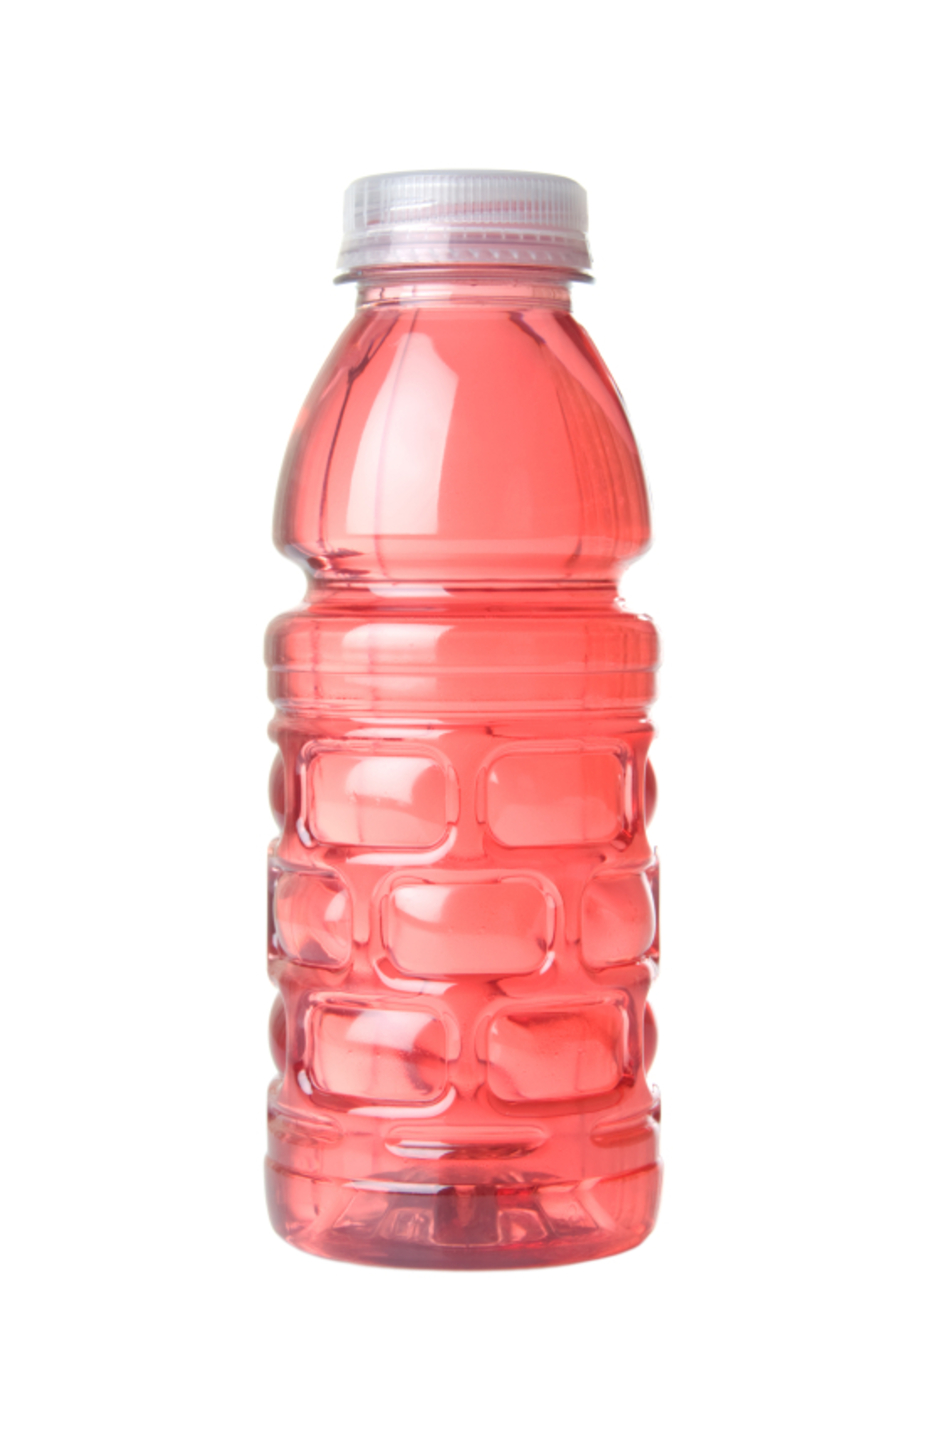 Sports Drinks: Are They Really That Bad For You?